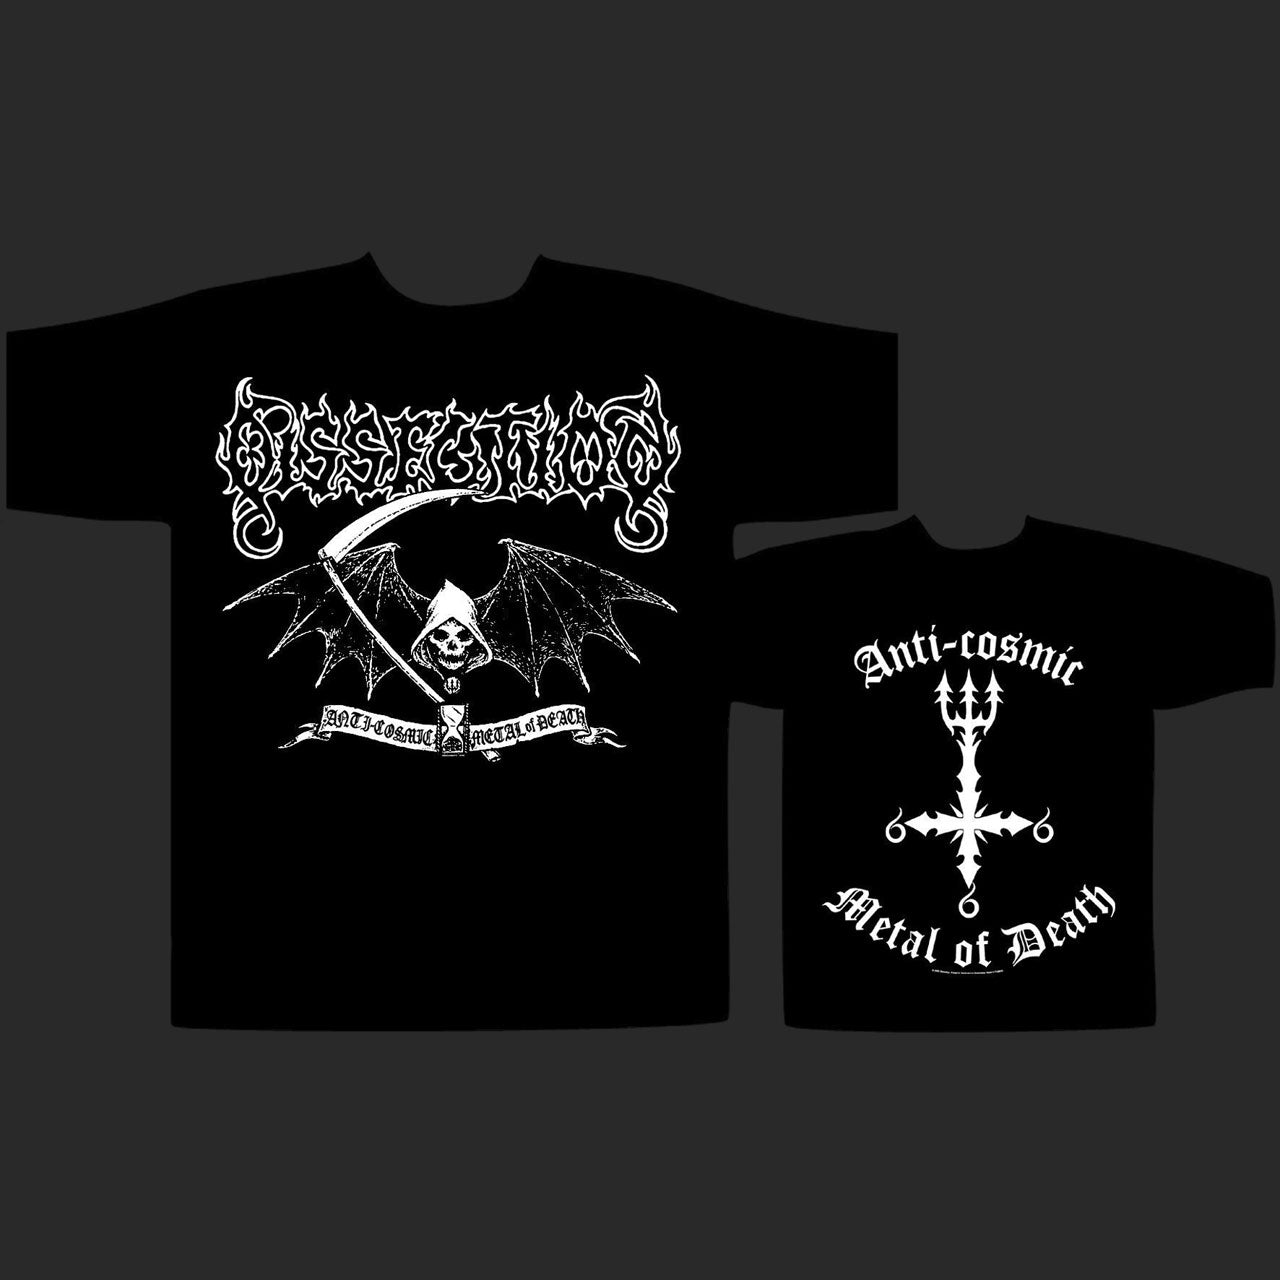 Dissection - Reaper / Anti-Cosmic Metal of Death (T-Shirt)